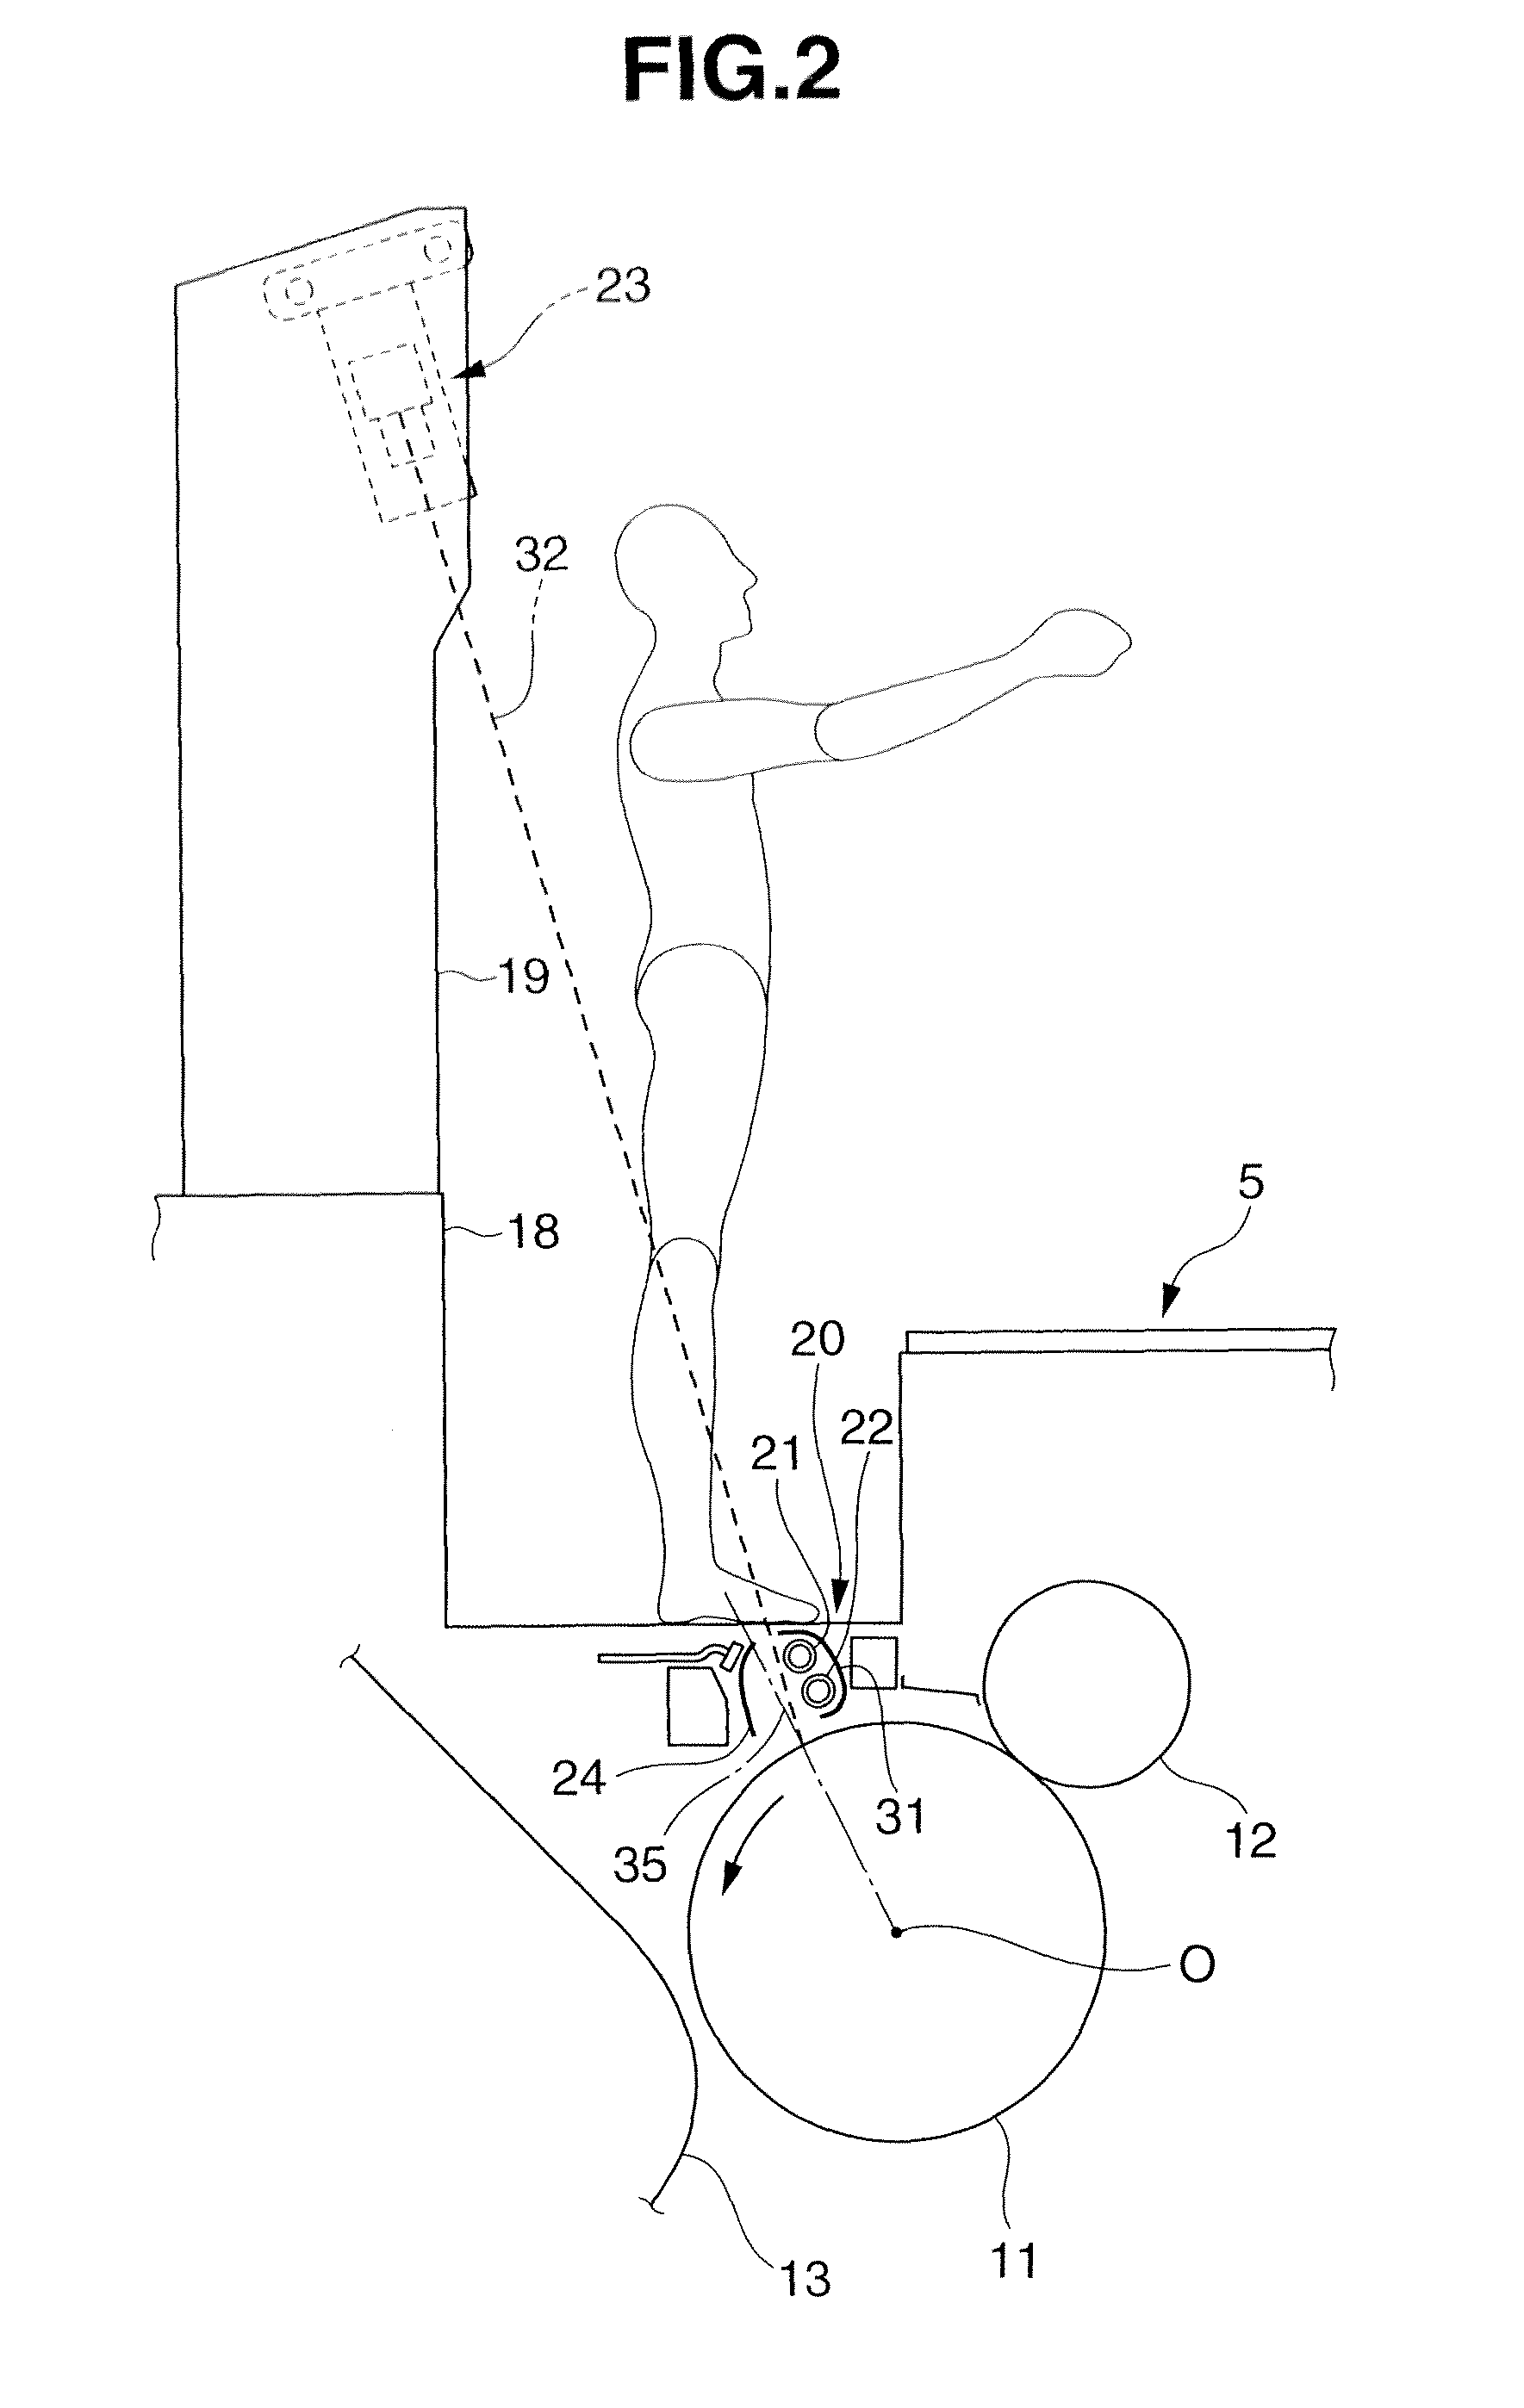 Printing quality inspection apparatus